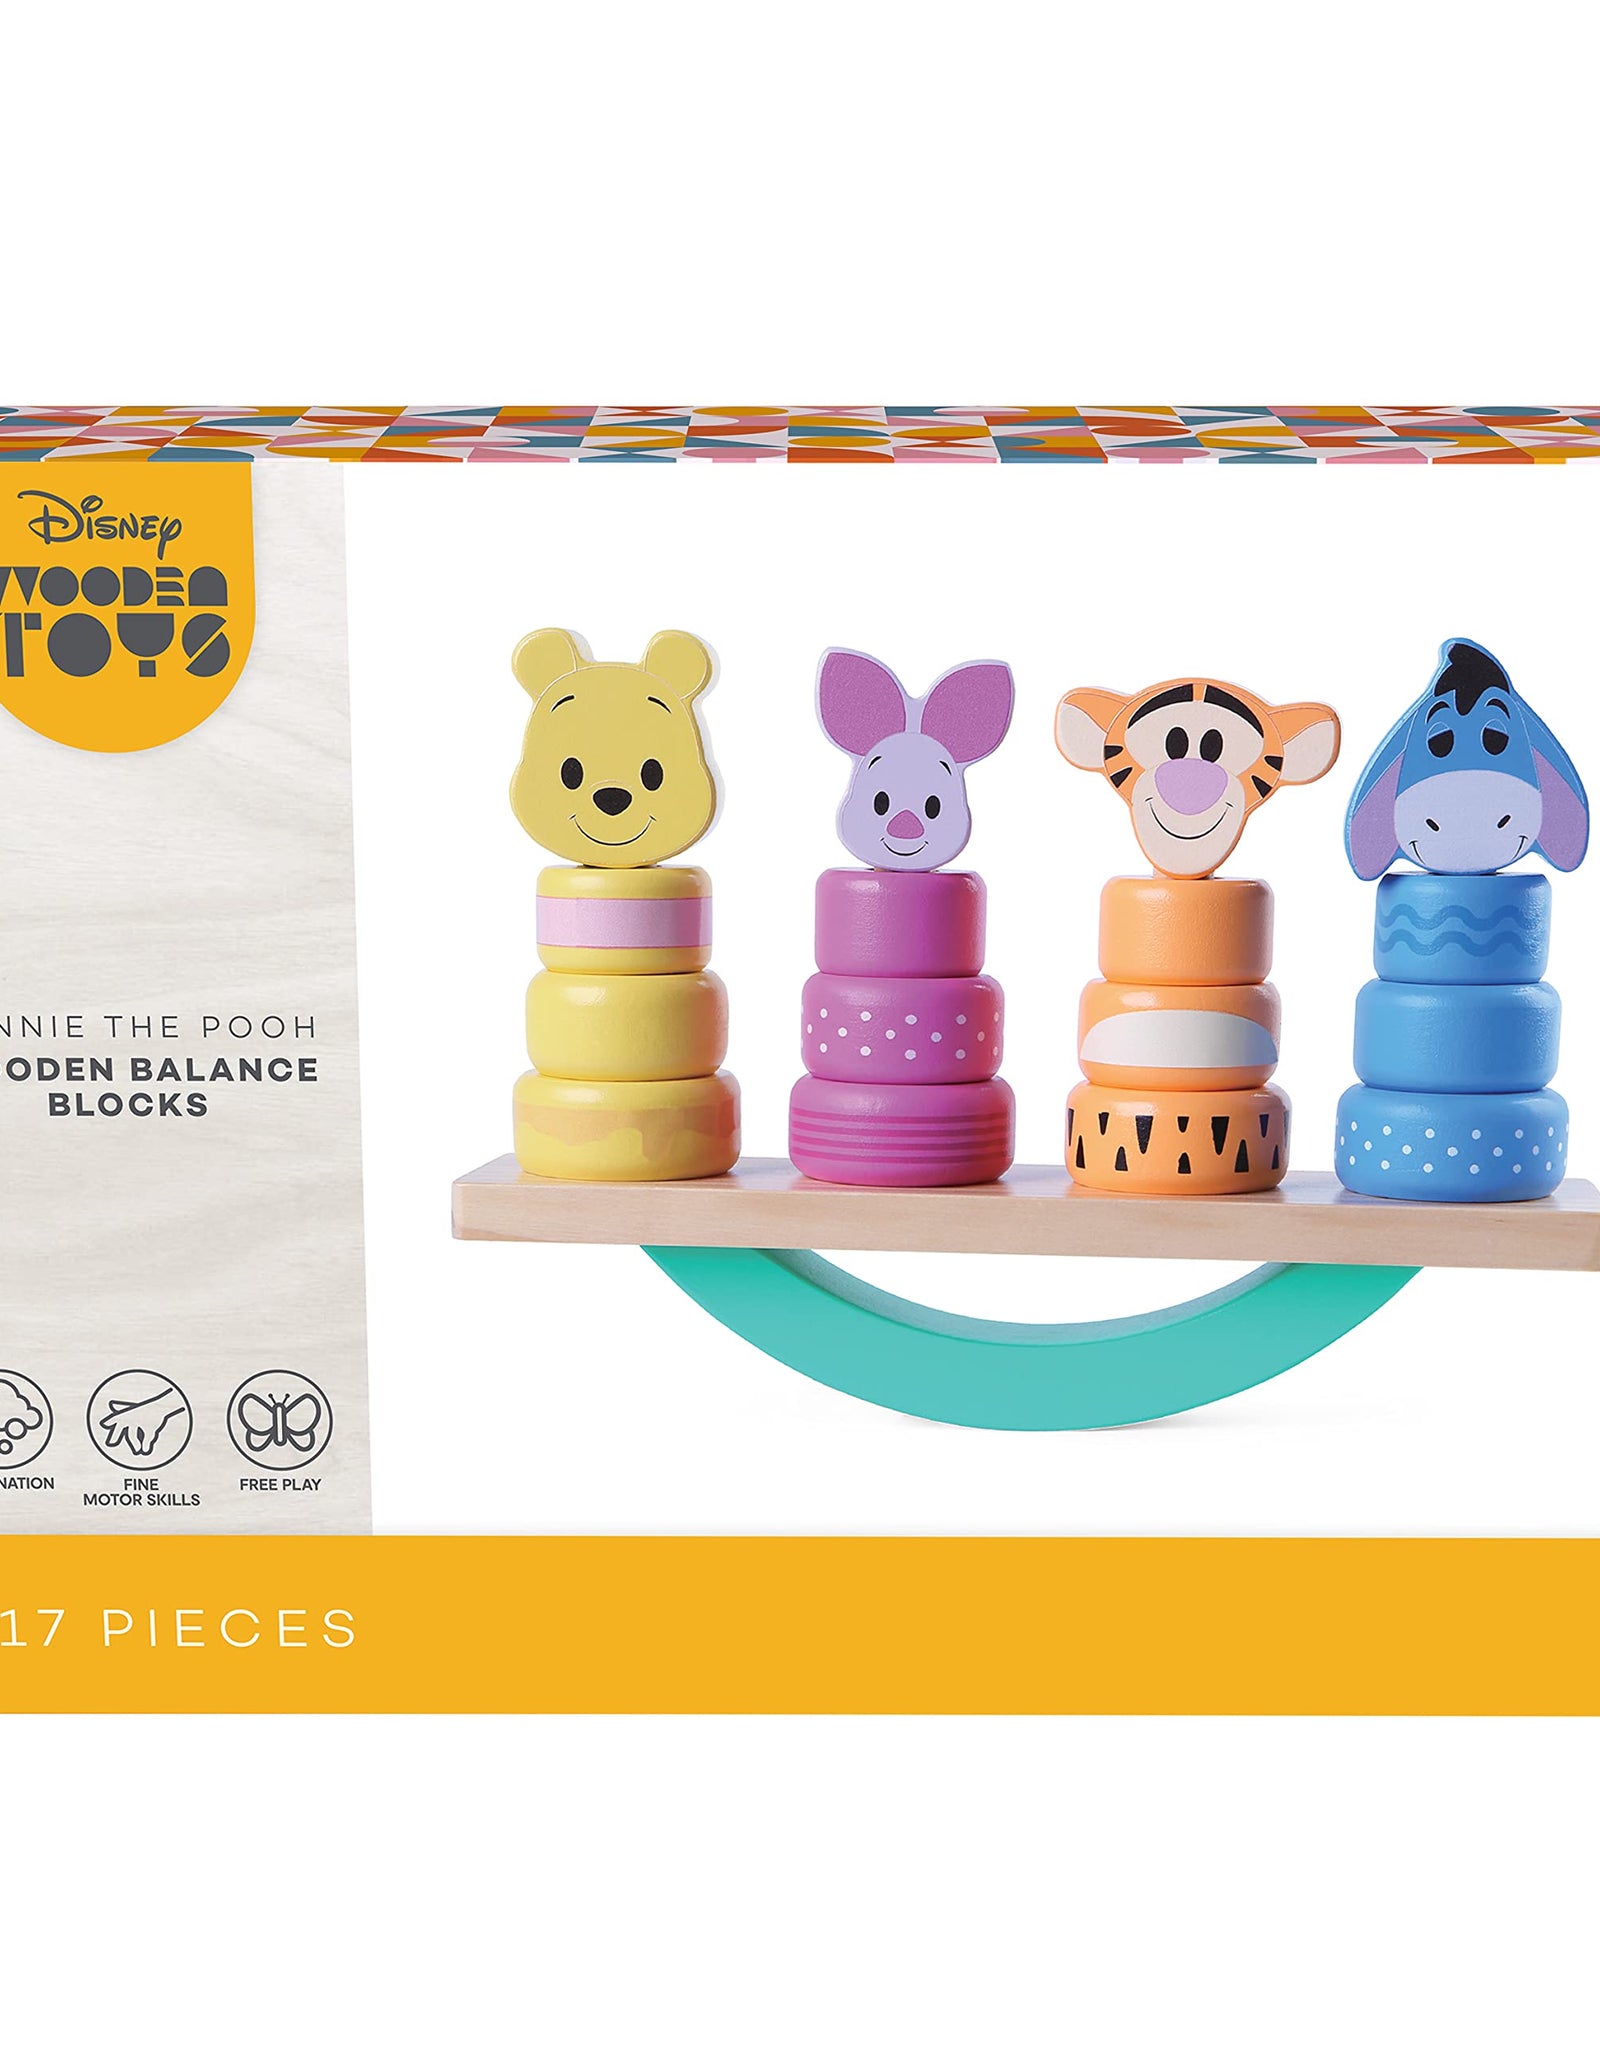 Disney Wooden Toys Winnie the Pooh Balance Blocks, 17-Piece Set Features Winnie the Pooh, Piglet, Tigger, and Eeyore, Amazon Exclusive, by Just Play